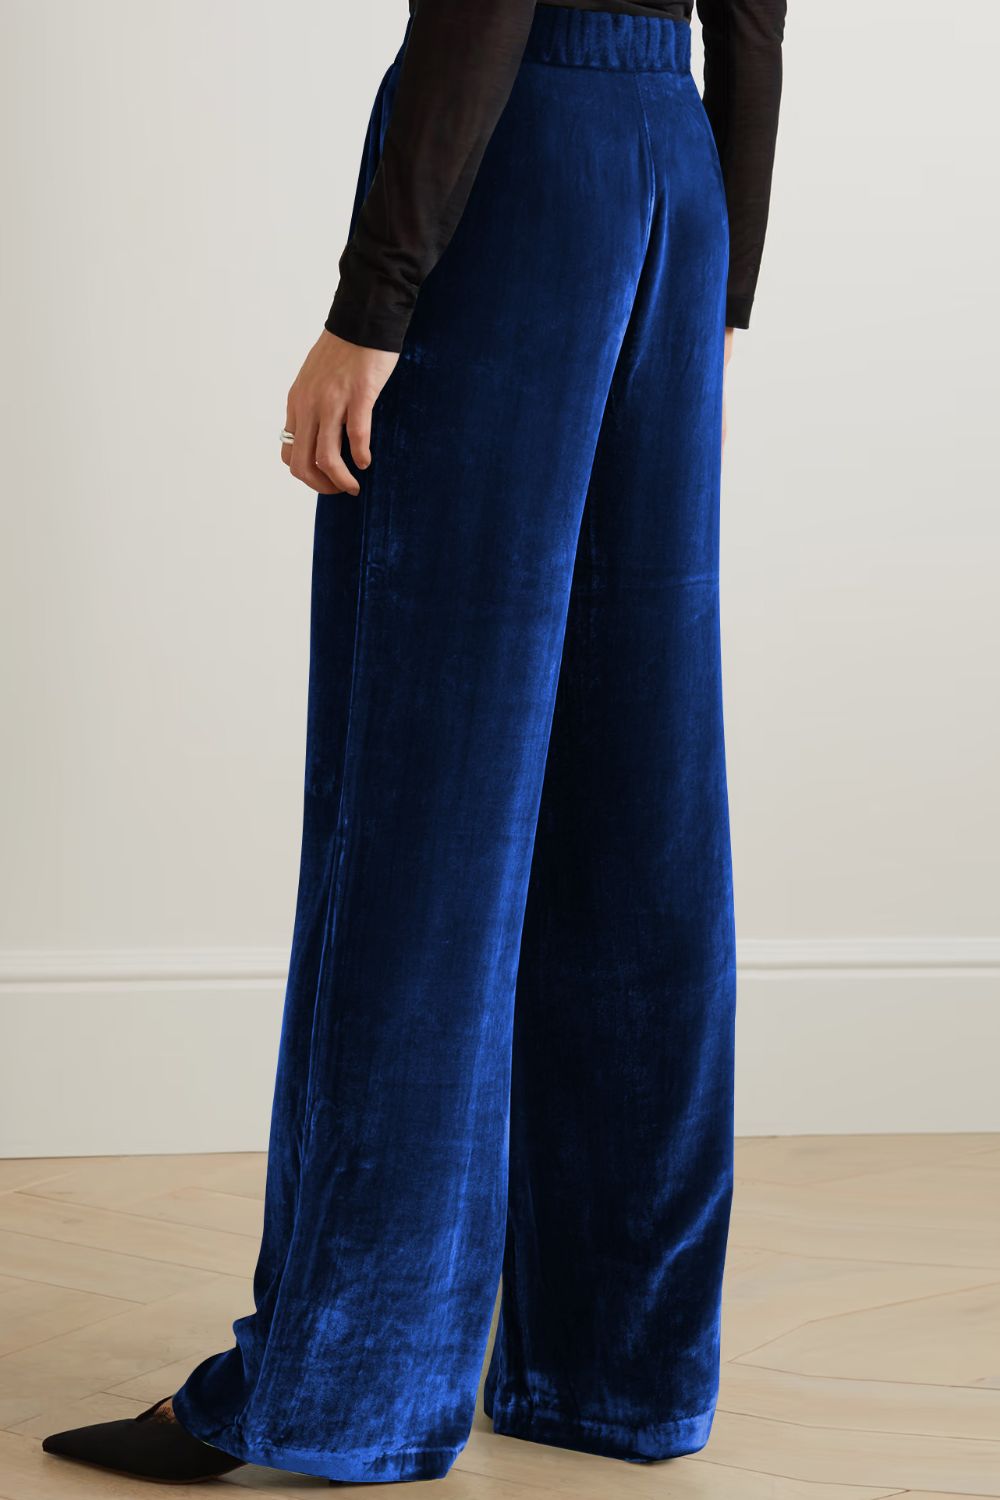 Loose Fit High Waist Long Pants with Pockets - Bottoms - Pants - 14 - 2024